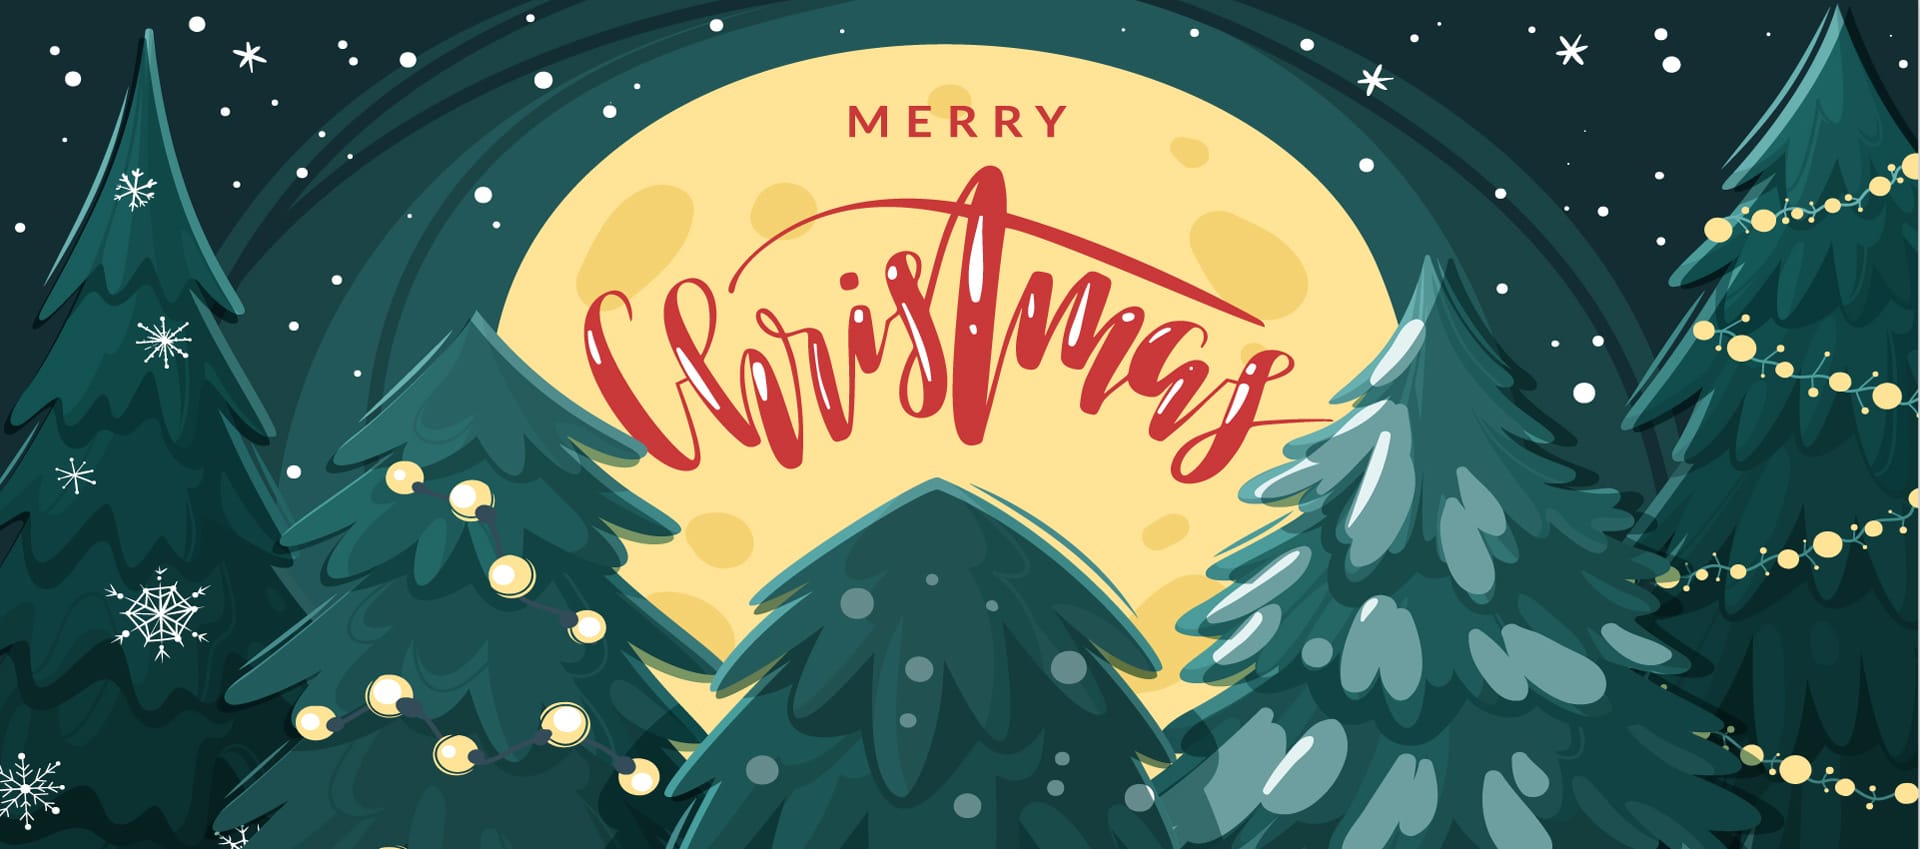 Christmas cartoon horizontal banners picture christmas banner clipart